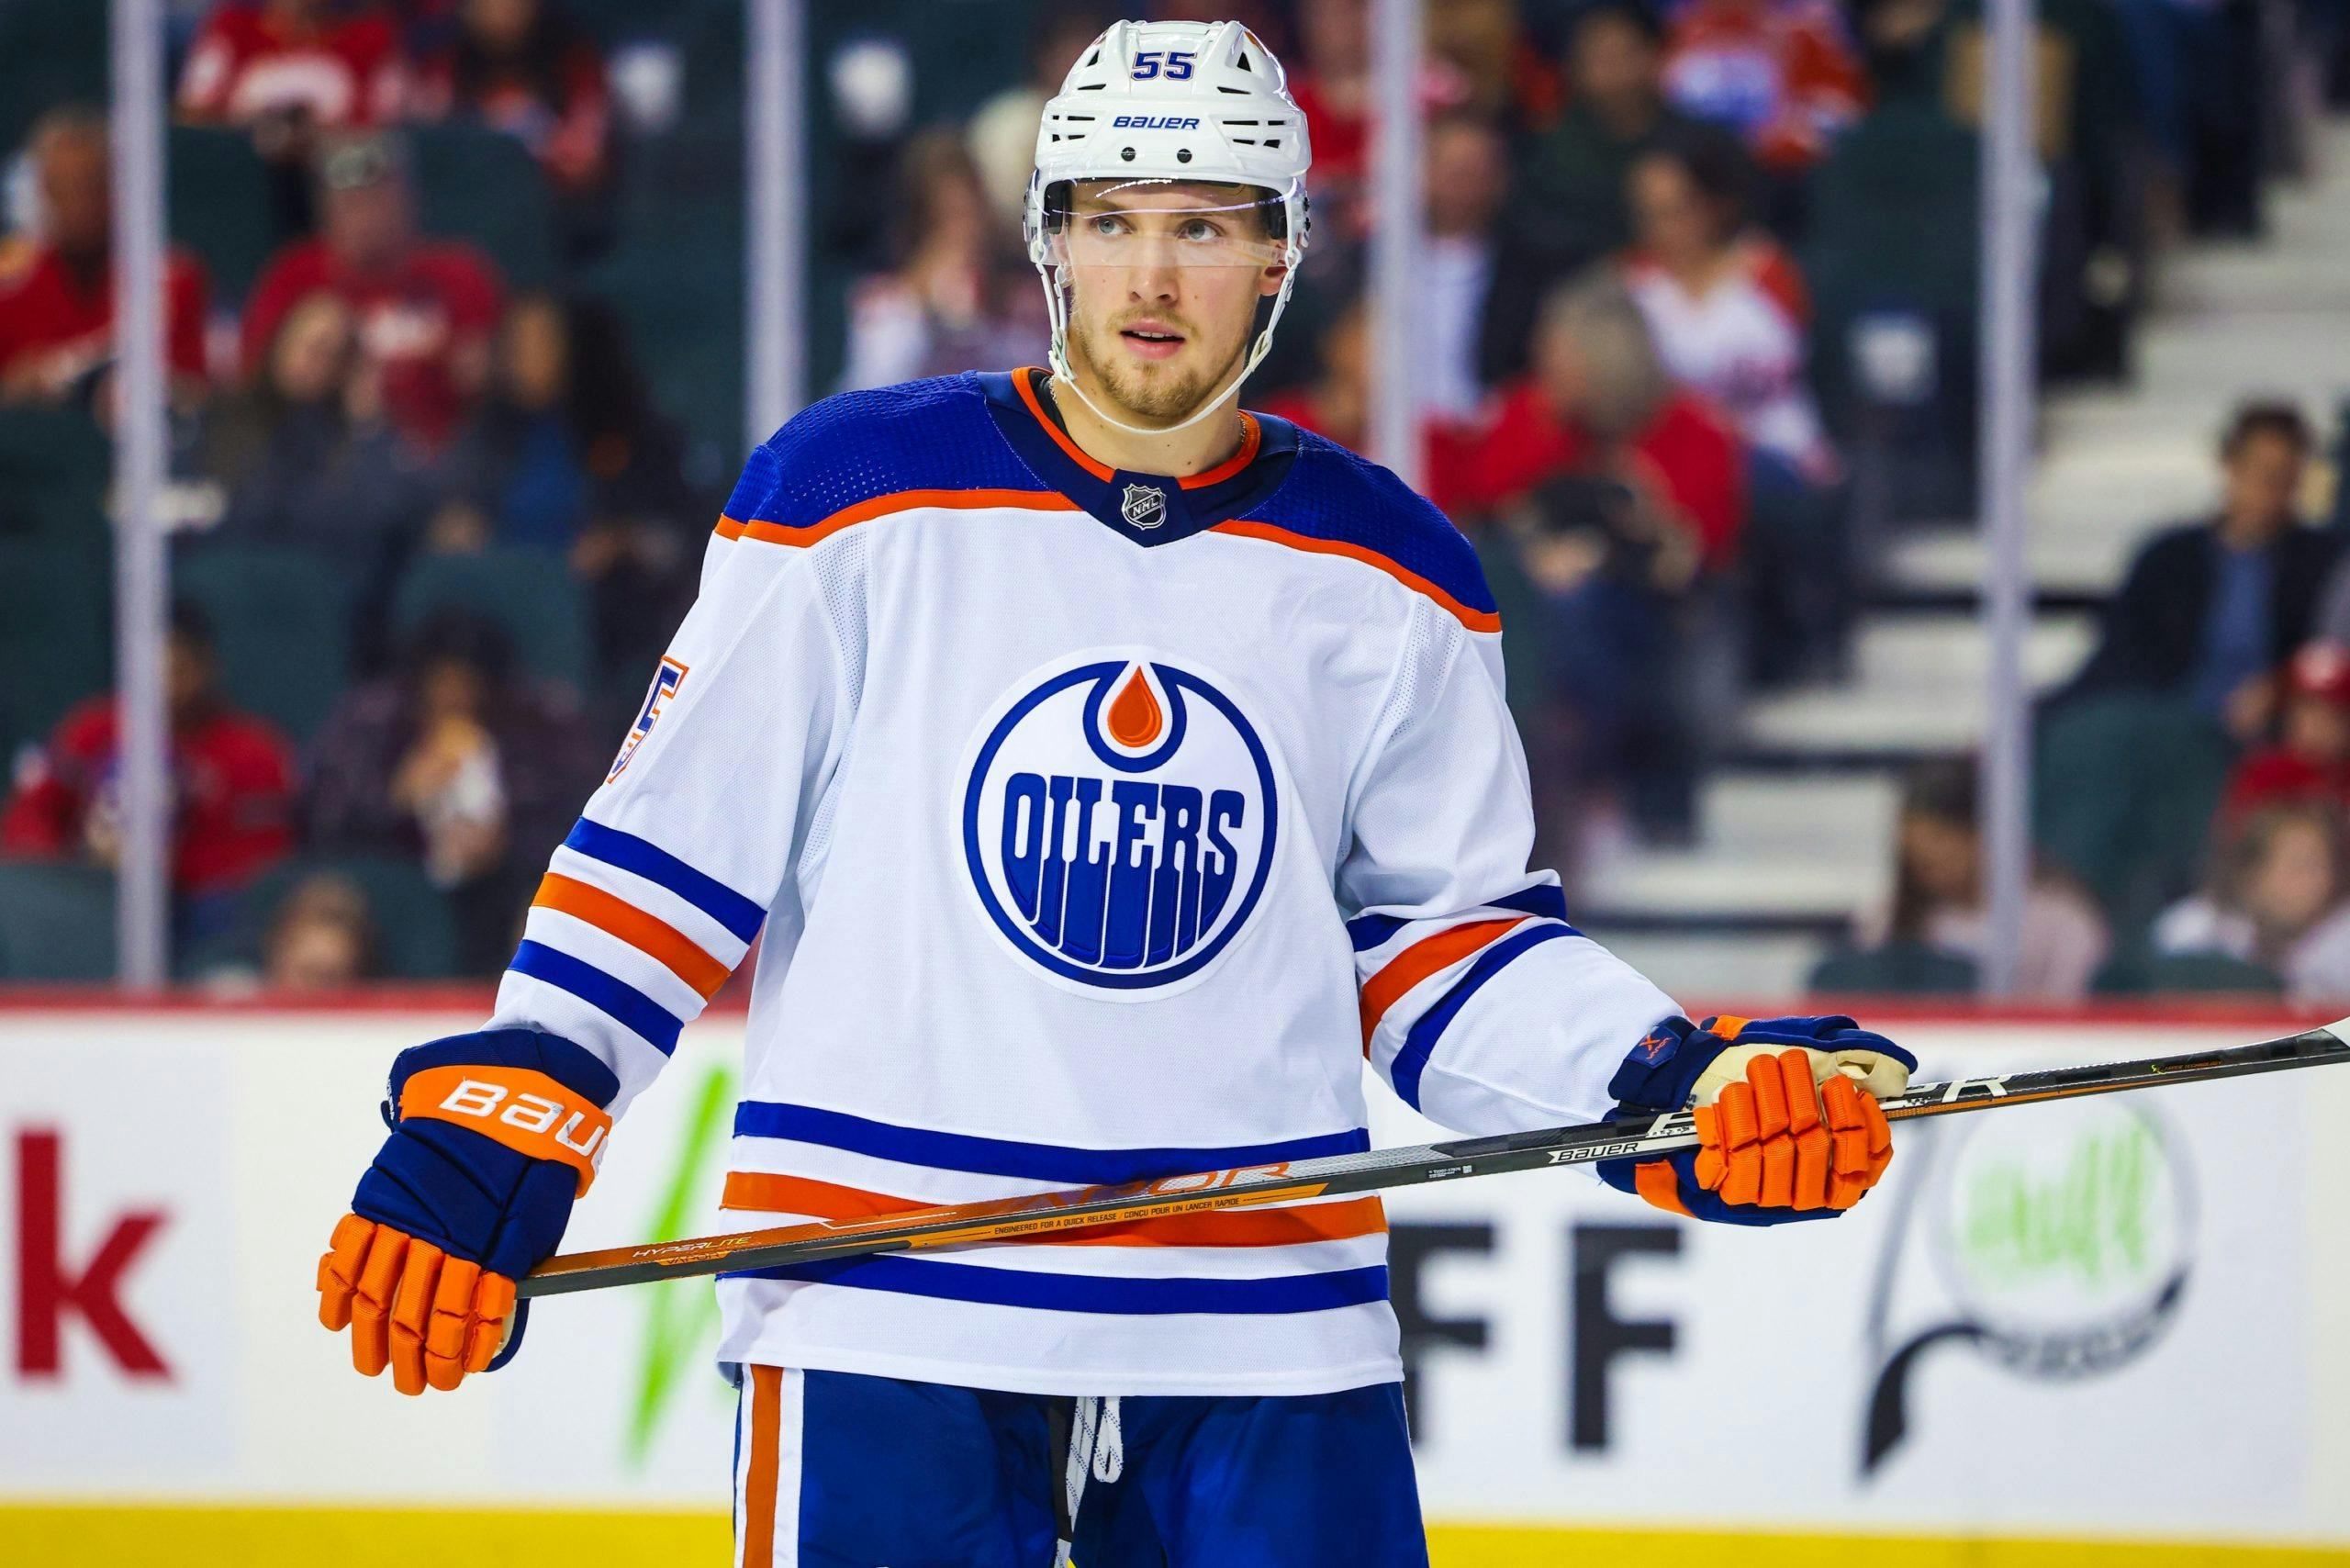 Dylan Holloway on the fourth line is ridiculous for the Oilers